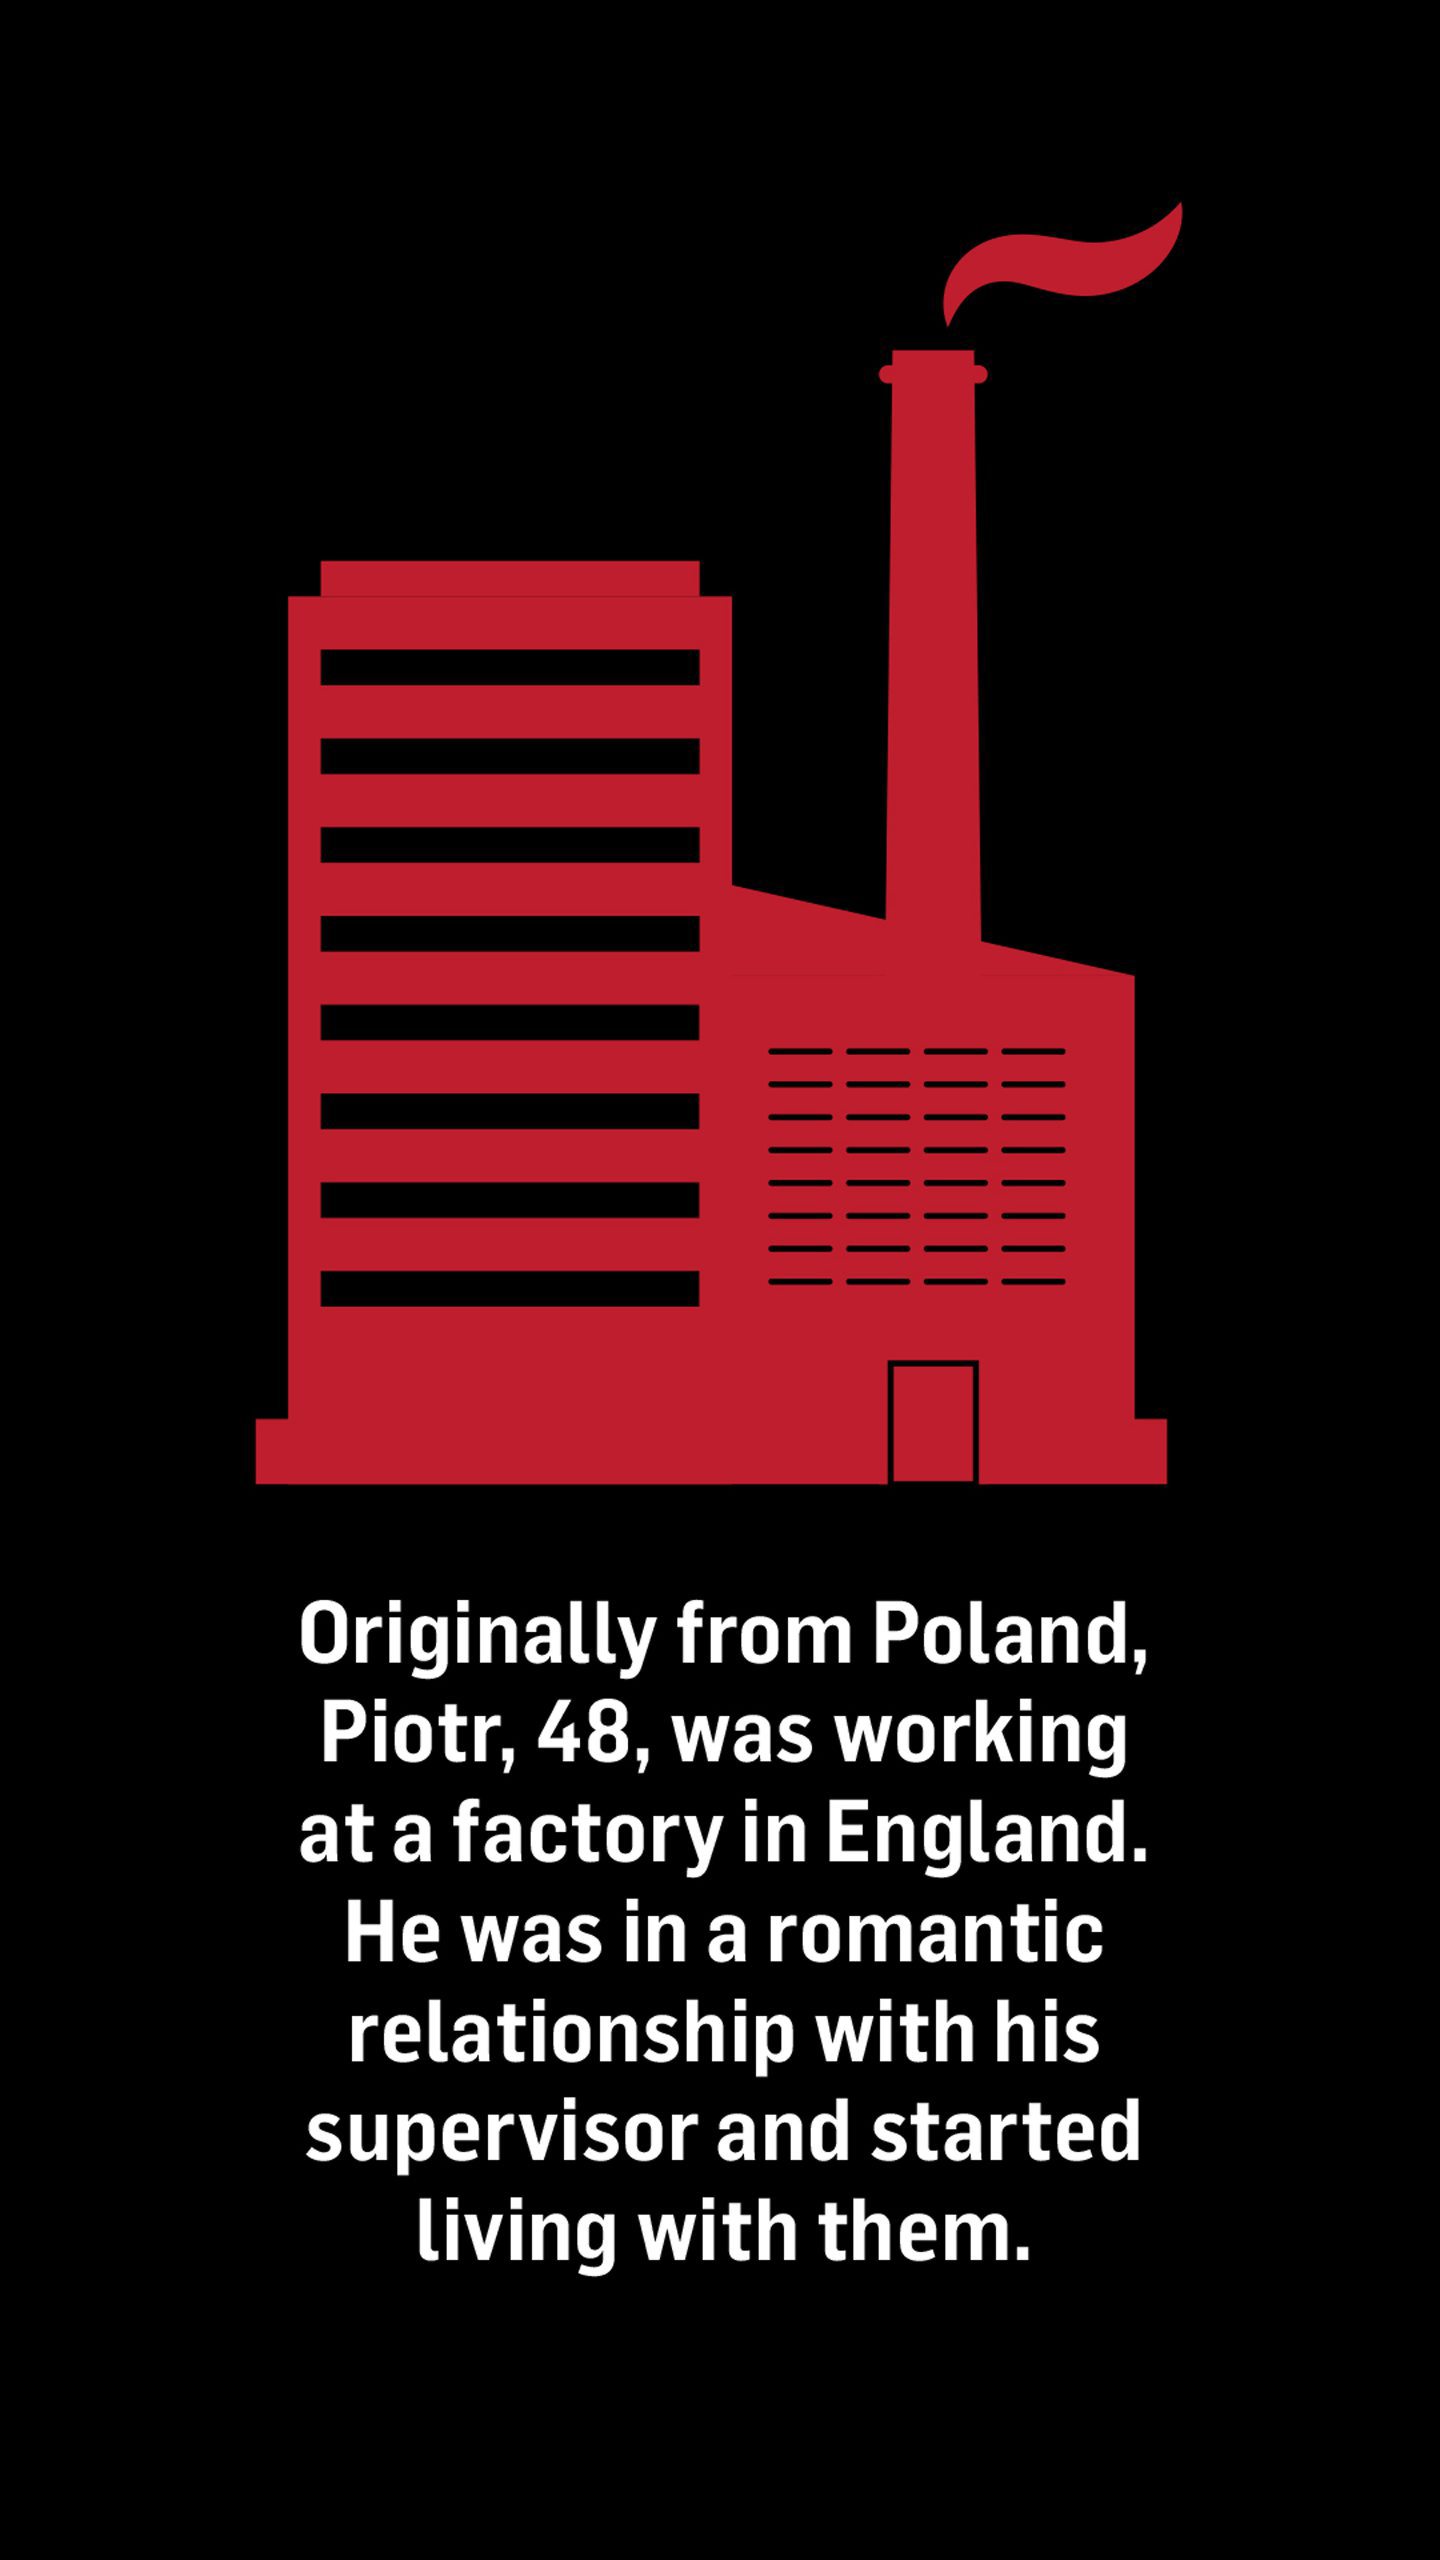 An illustration of a red factory with text that says: Originally from Poland, Piotr, 48, was working at a factory in England. He was in a romantic relationship with his supervisor and started living with them.